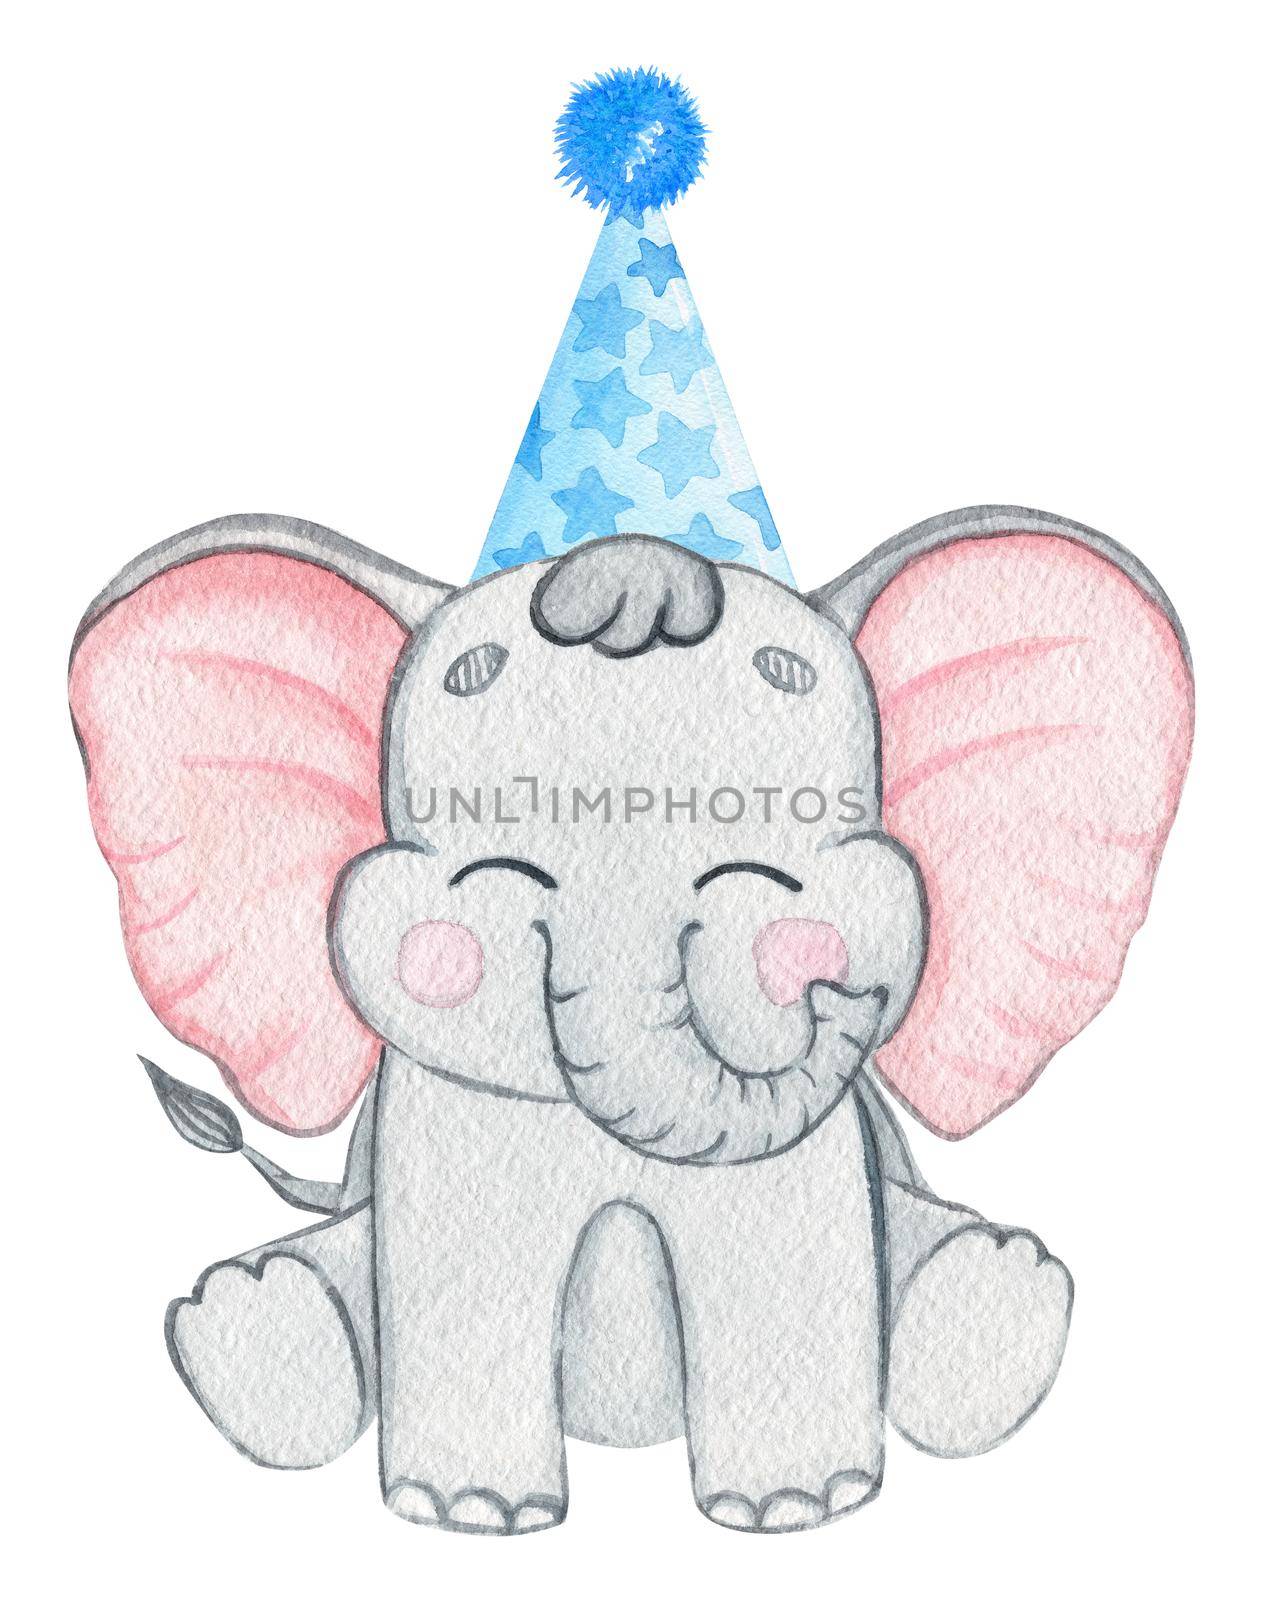 Watercolor elephant in blue party cap isolated on white background. Hand drawn baby animal illustration